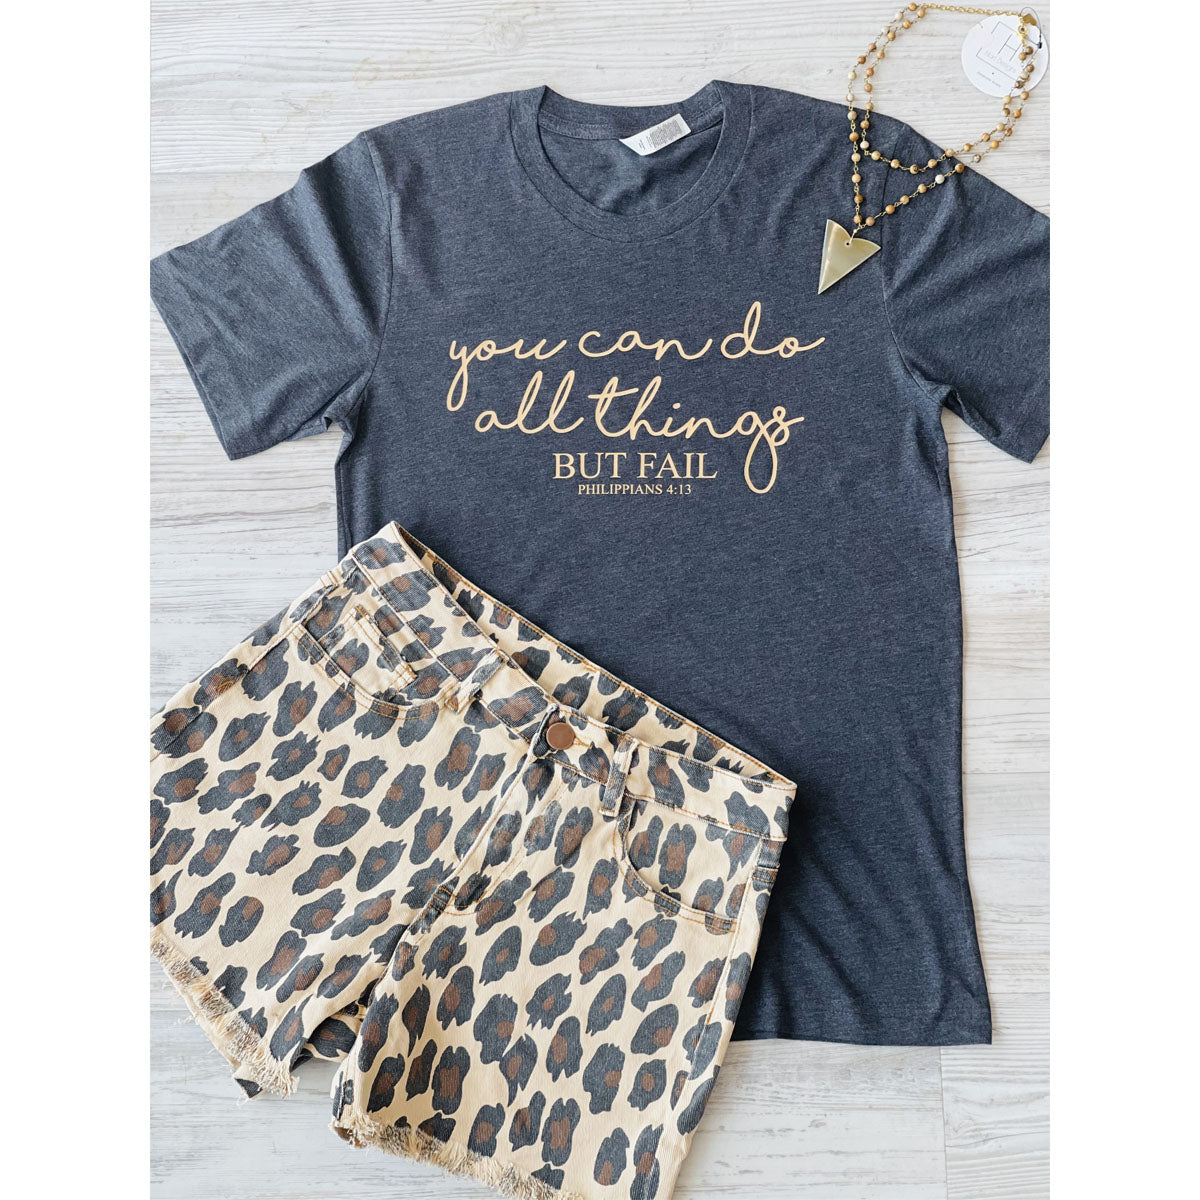 You Can Do All Things But Fail Shorts and T-shirt Set (Dark Grey Heather Tee/Leopard Jean Shorts) - Southern Grace Creations